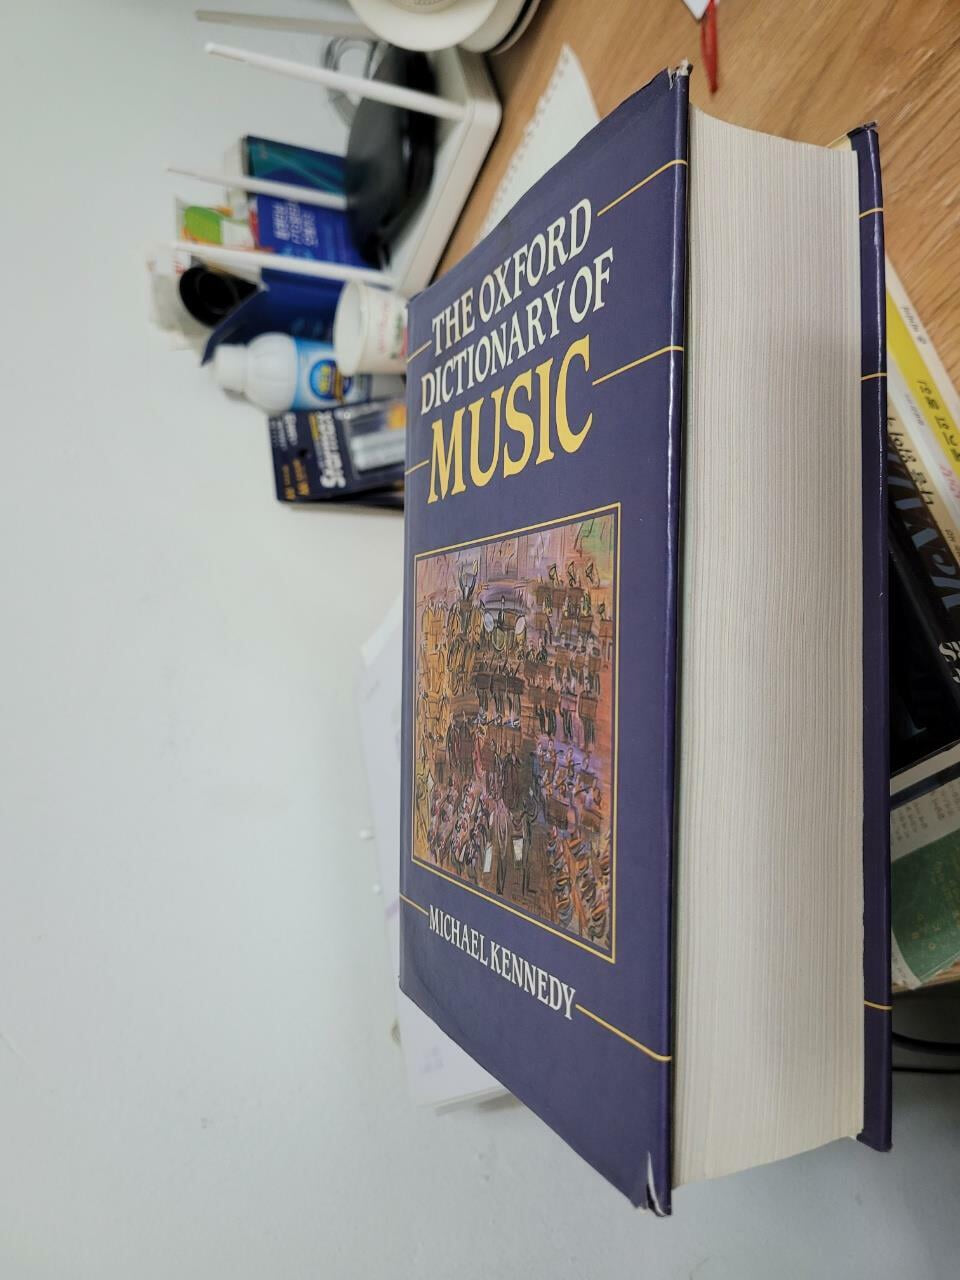 The Oxford Dictionary of Music (Hardcover) 